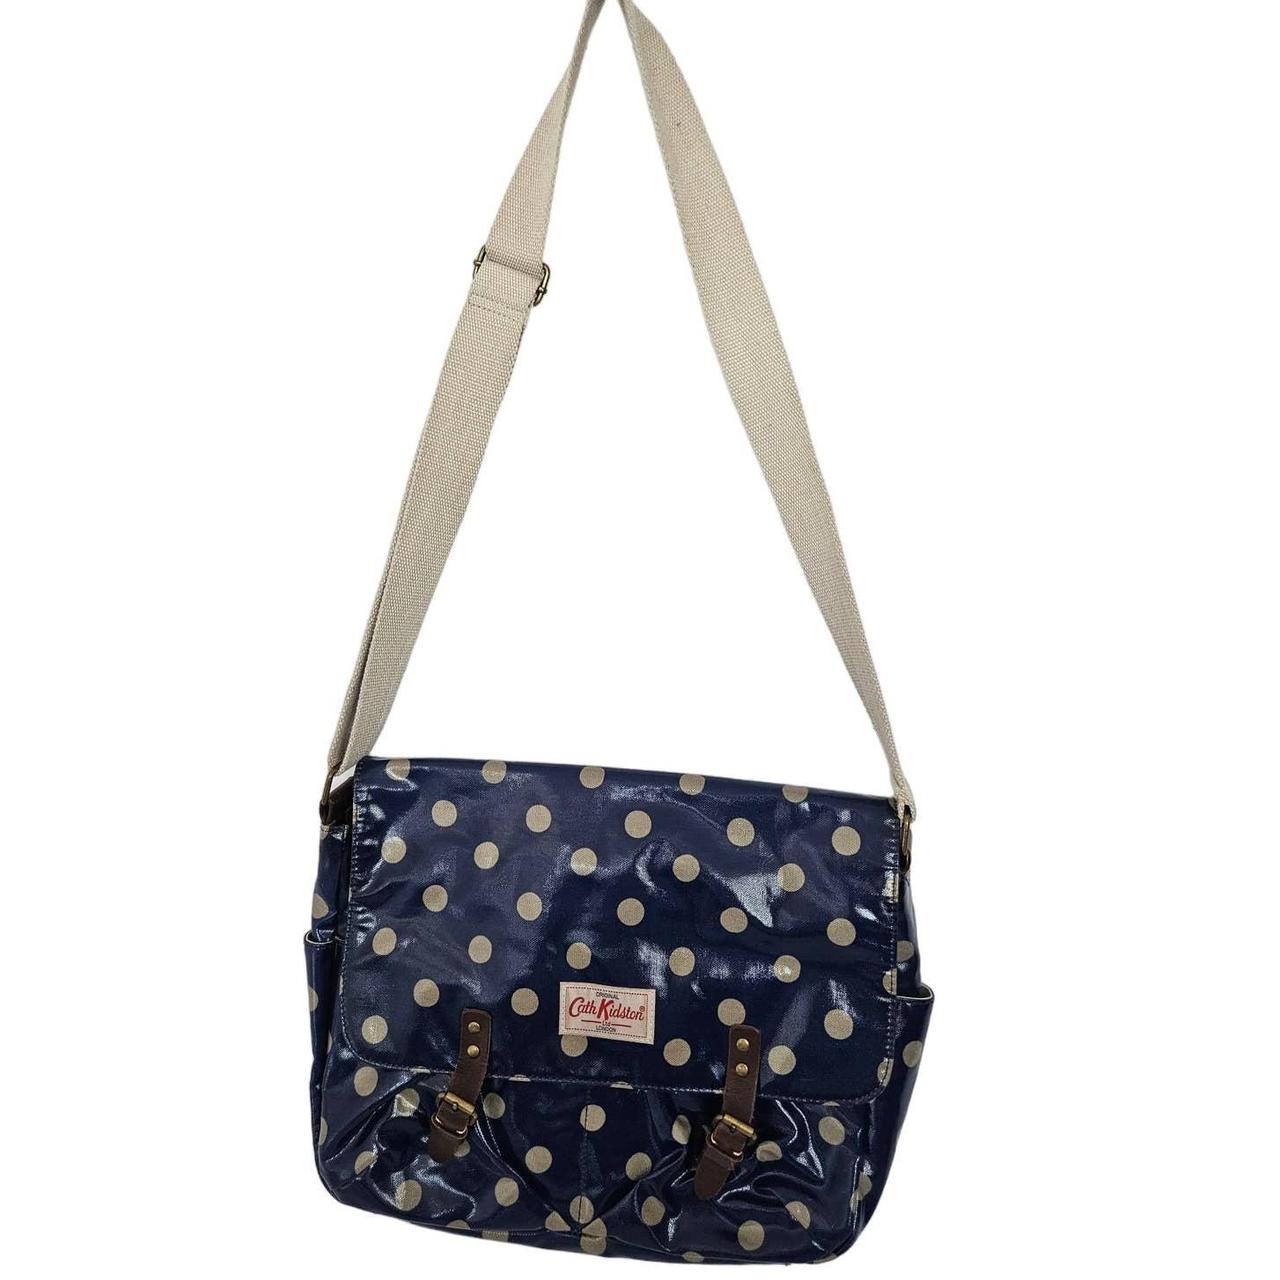 Cath Kidston bag for sale in Co. Kildare for €40 on DoneDeal